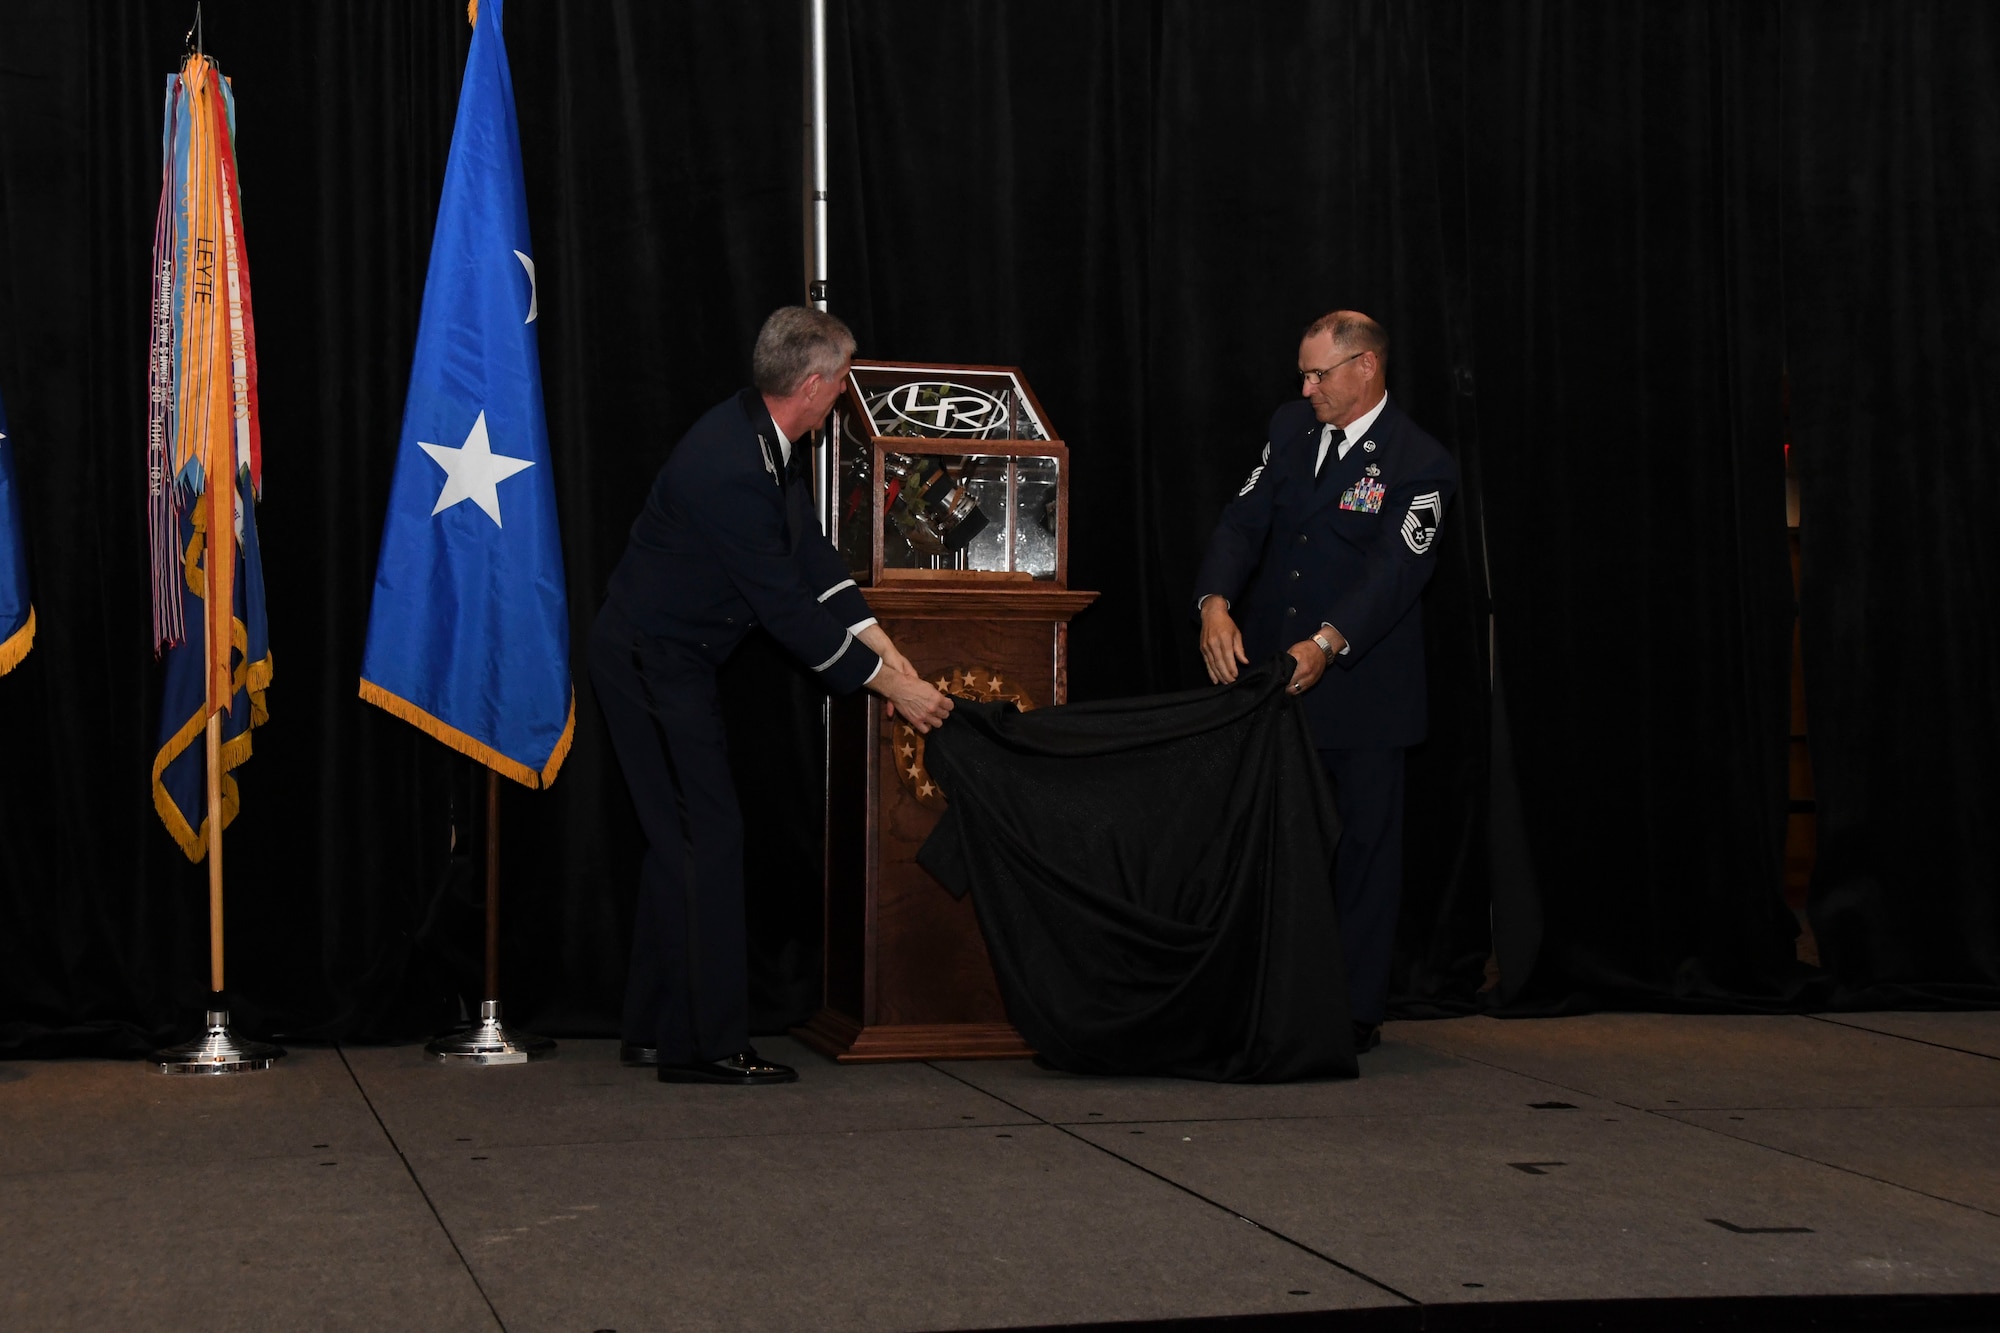 Col. James Morriss, 307th Bomb Wing vice commander, and Chief Master Sgt. Vernon Cox, 307th Maintenance Group, unveil the Zamperini Warrior Award during the 307th Bomb Wing’s 75th Anniversary and Awards Gala at the Shreveport Convention Center April 1, 2017. The Zamparini Warrior Award is awarded at the Wing Commander’s discretion to Airmen that reflect the characteristics of true warriors. (U.S. Air Force photo by Staff Sgt. Callie Ware/Released)